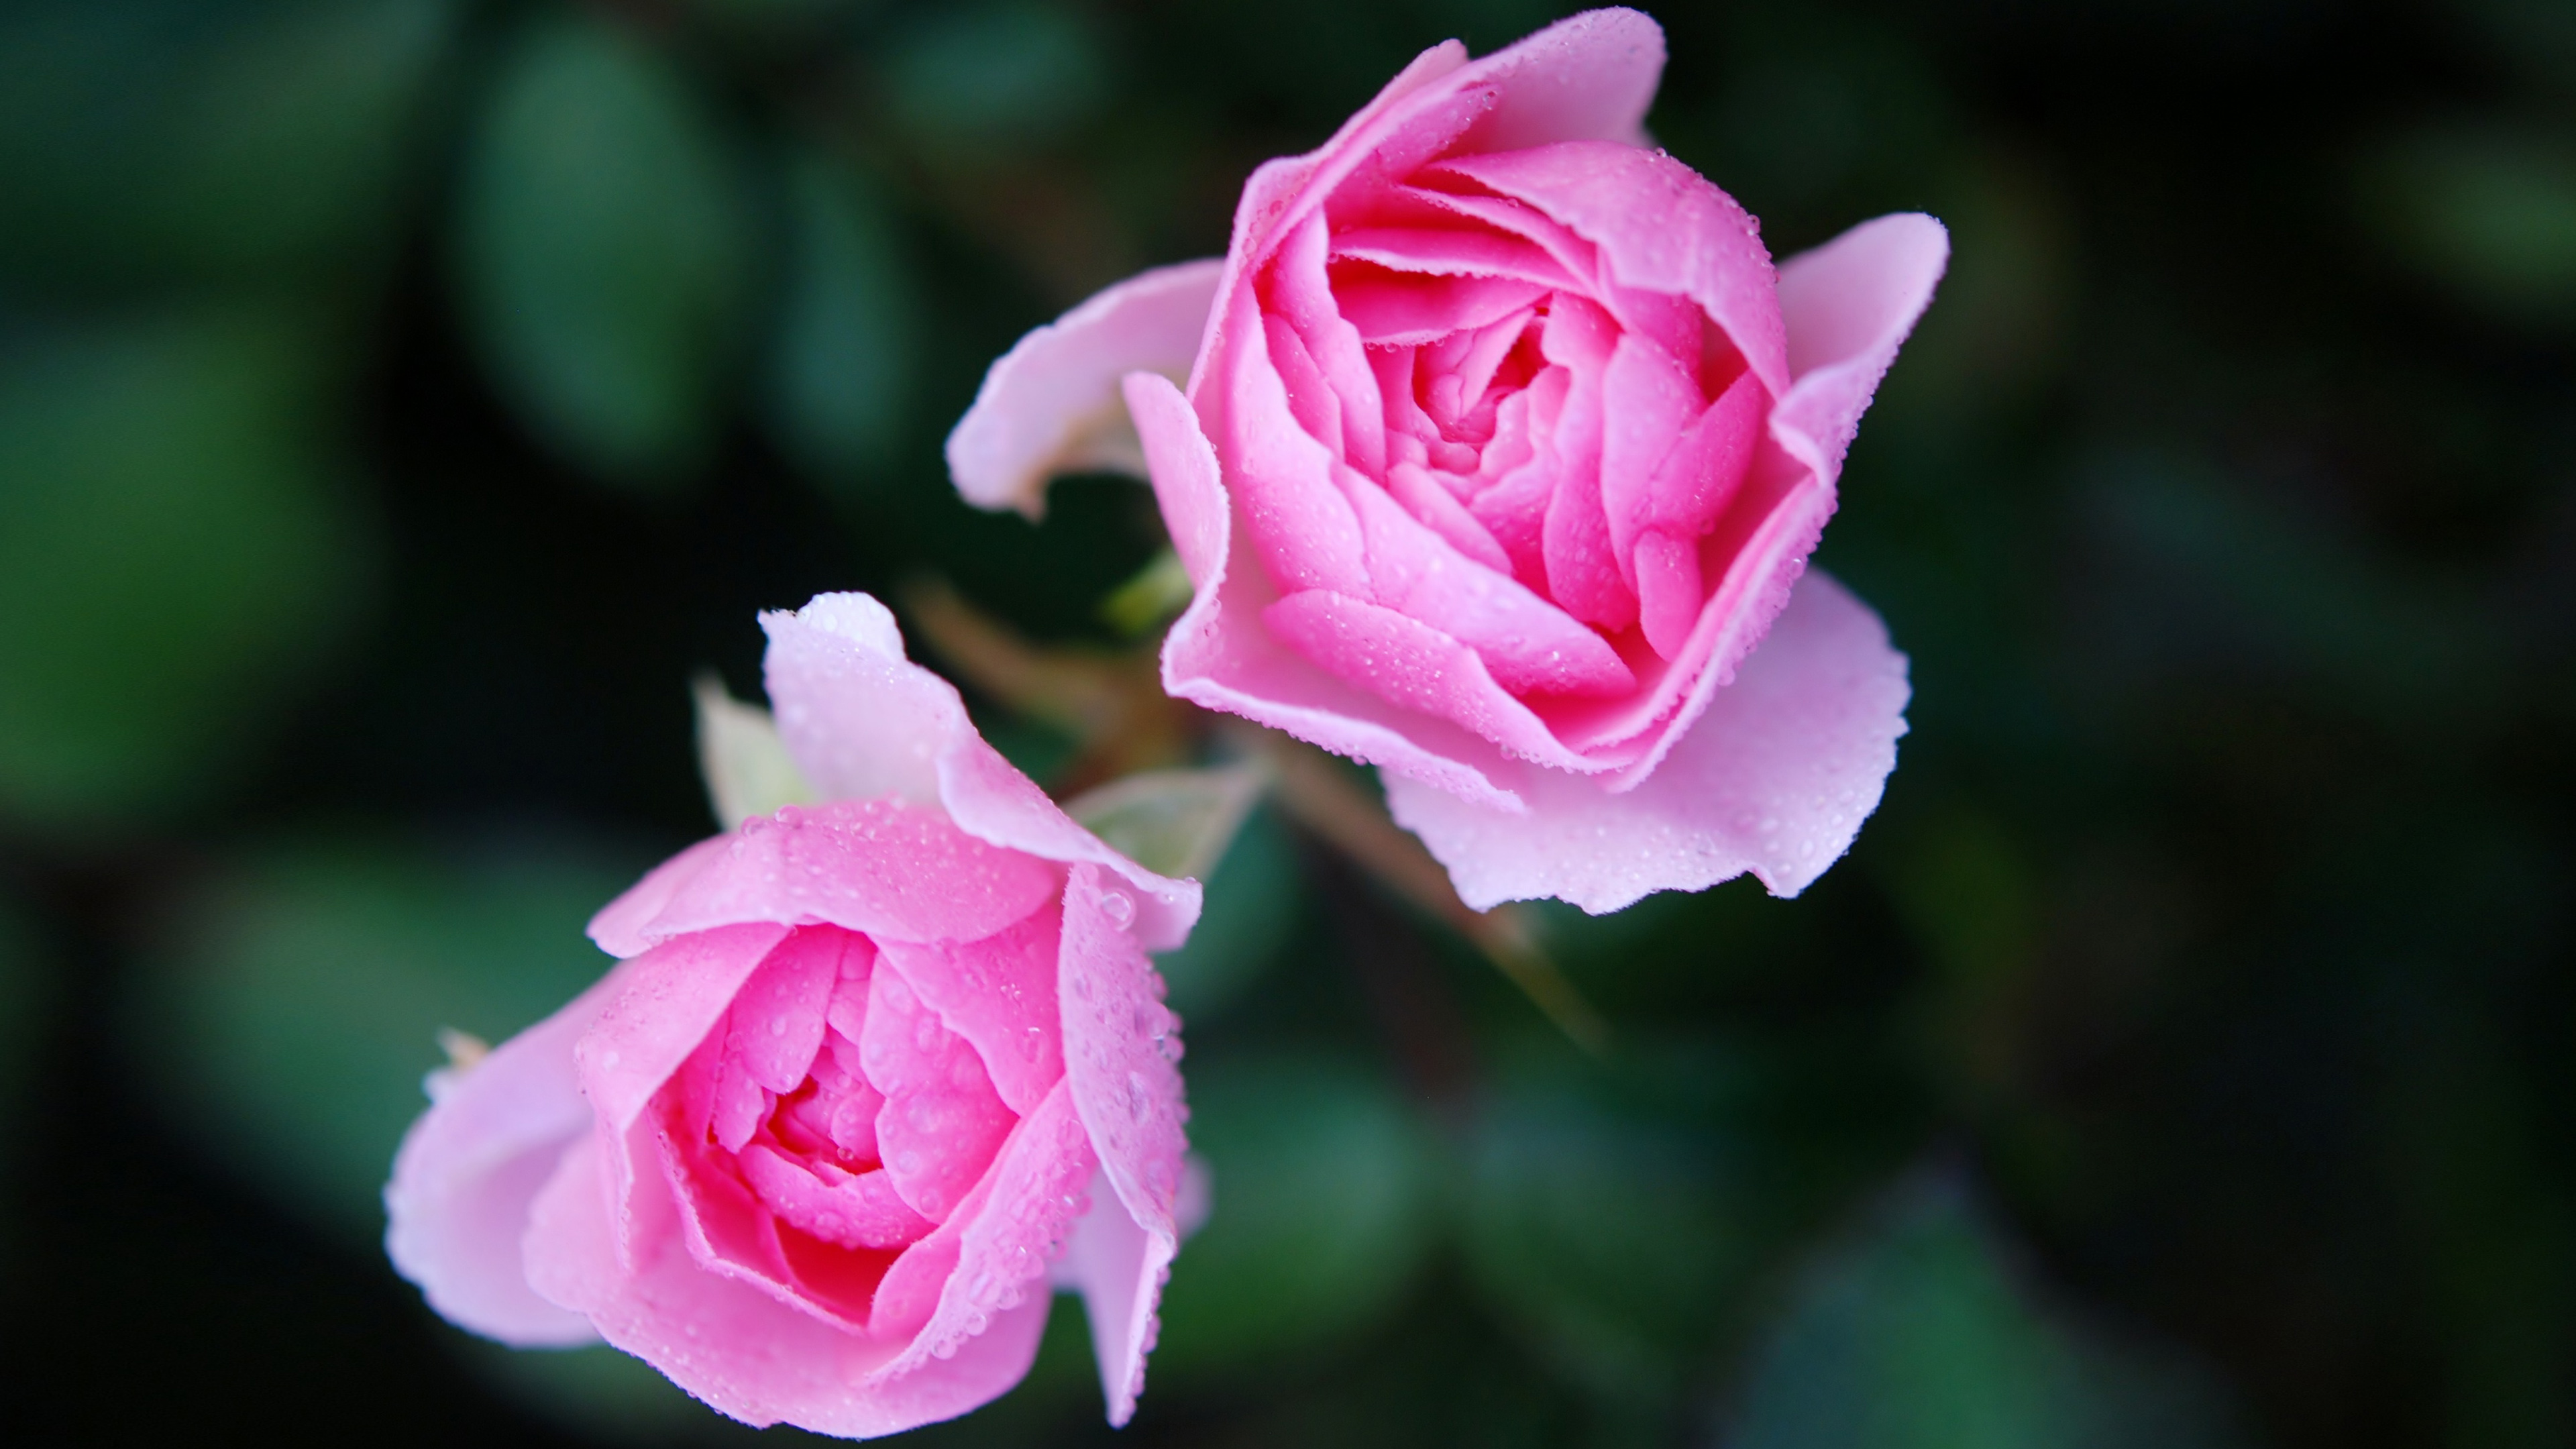 4K Pictures of Pink Roses for Wallpaper - HD Wallpapers | Wallpapers ...